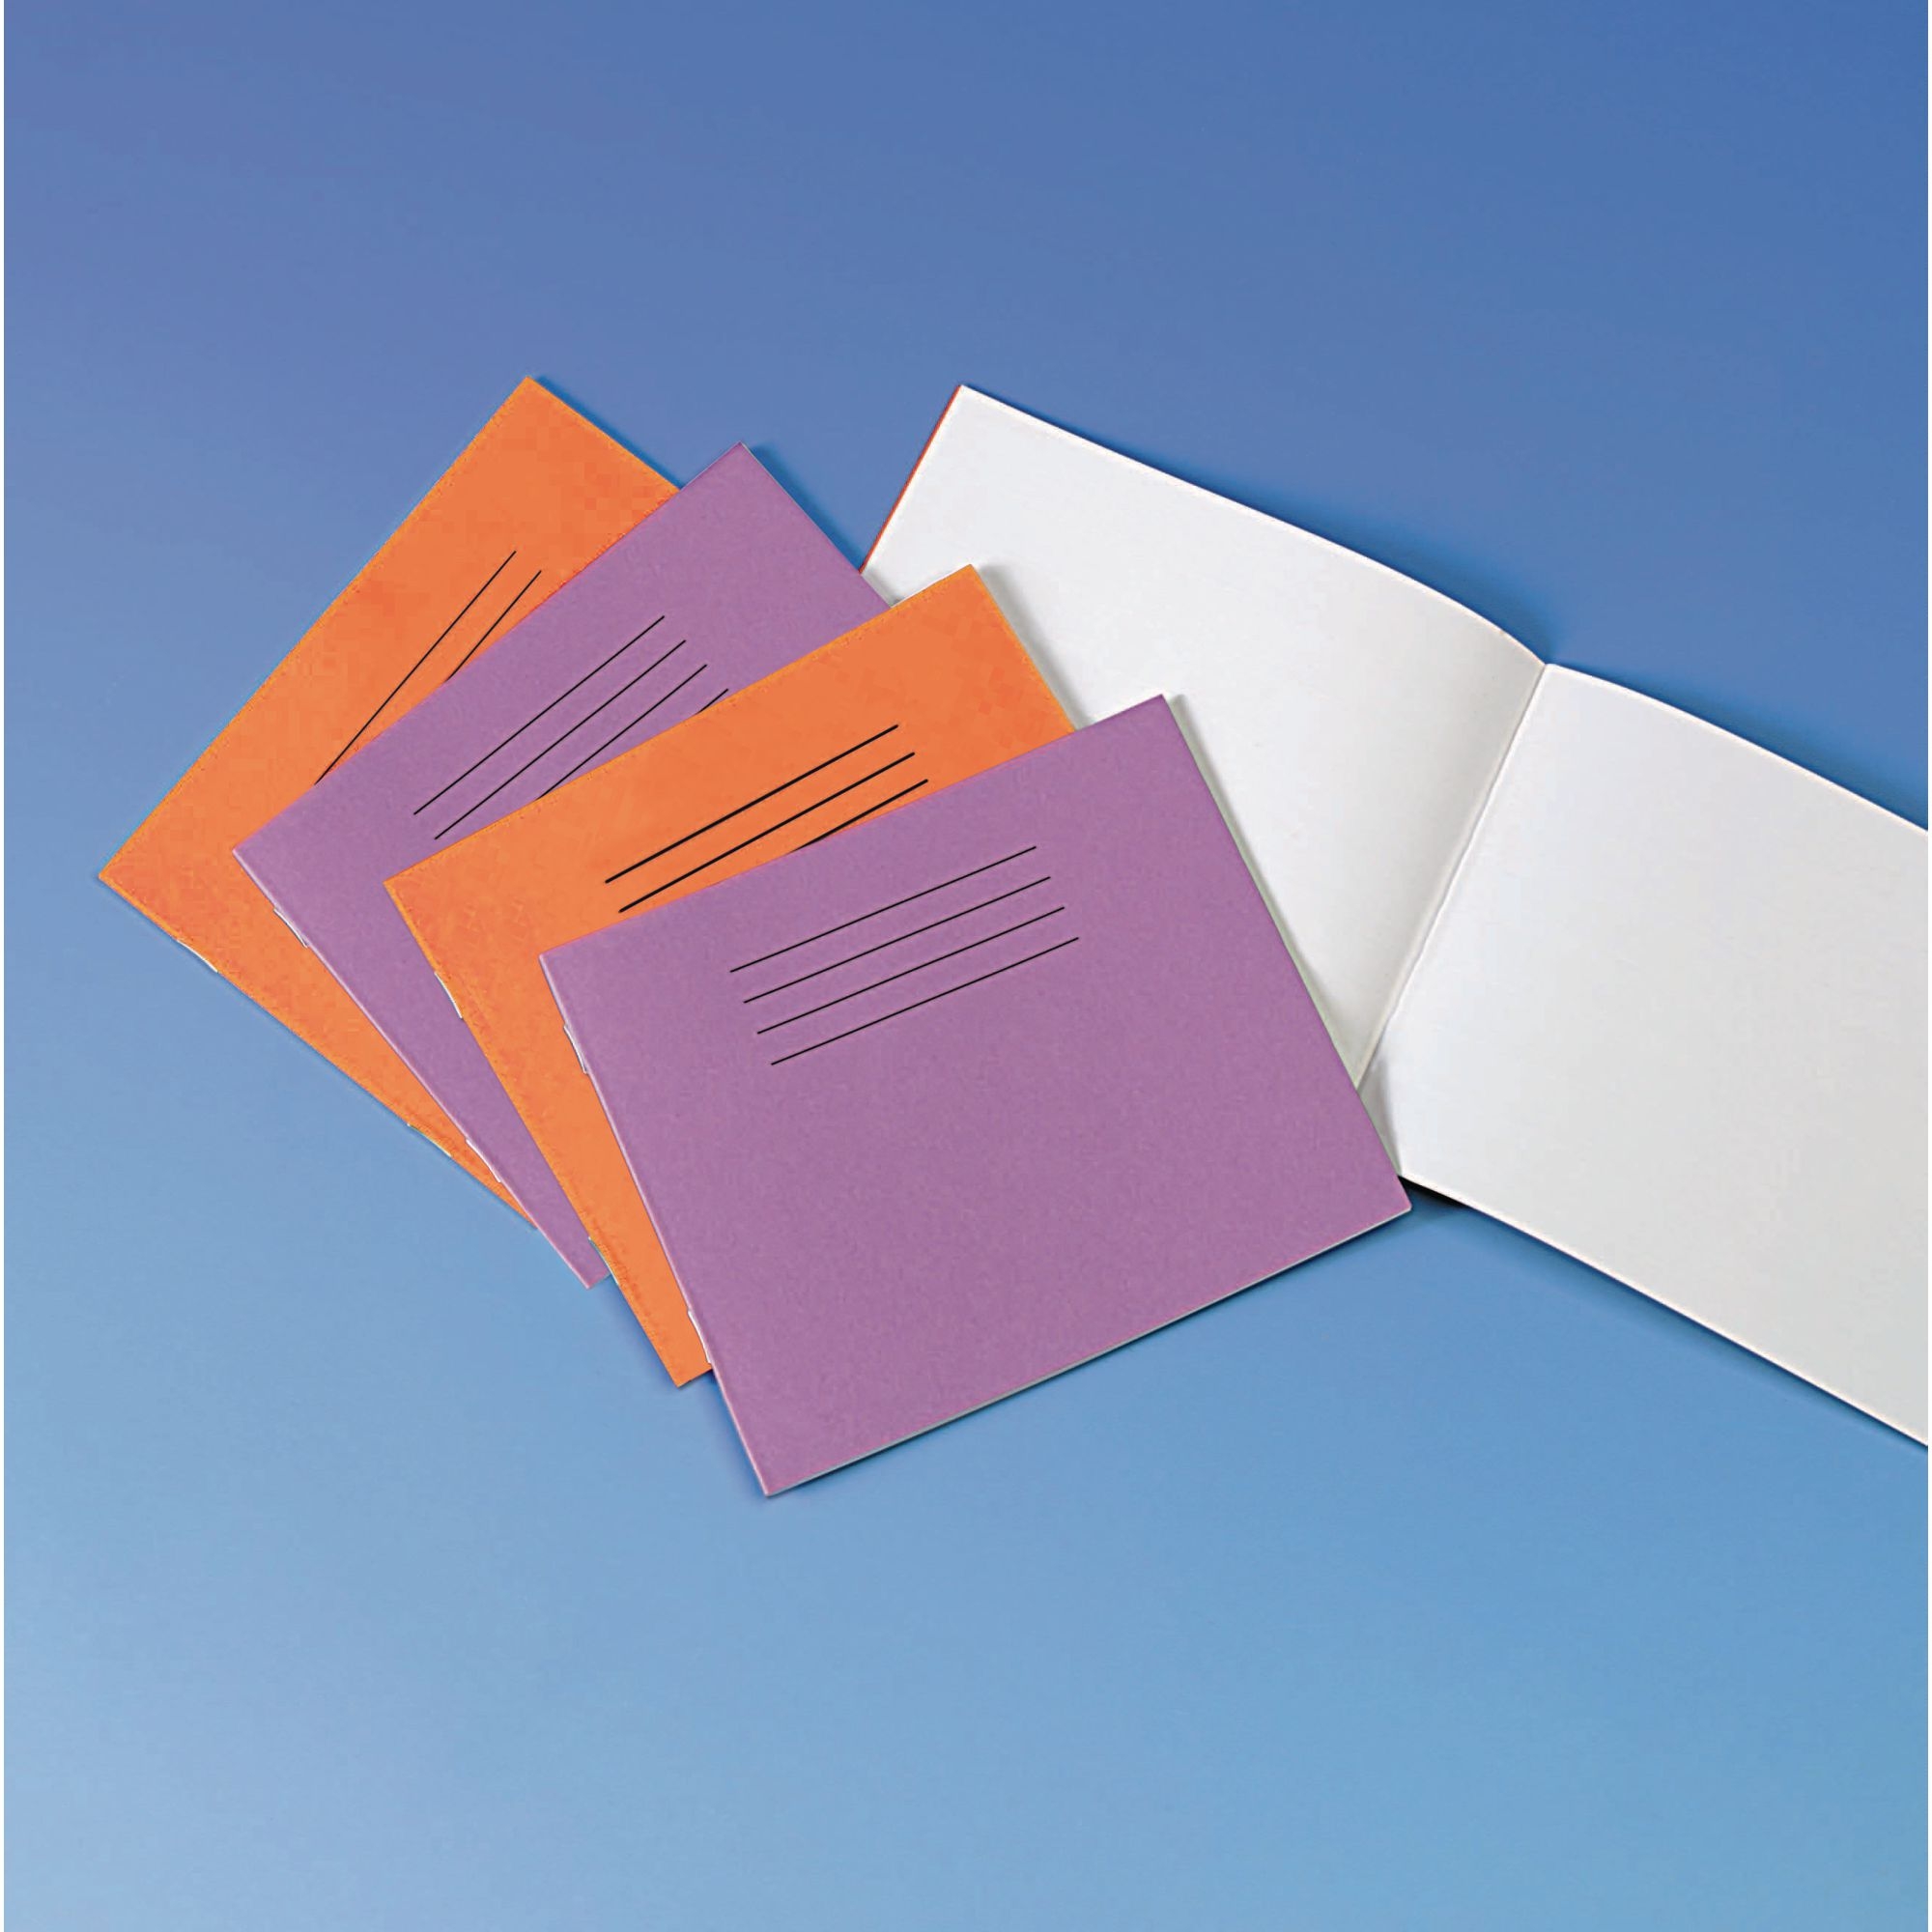 Orange 5.25x6.5" Exercise Book 24-Page, Plain - Pack of 100